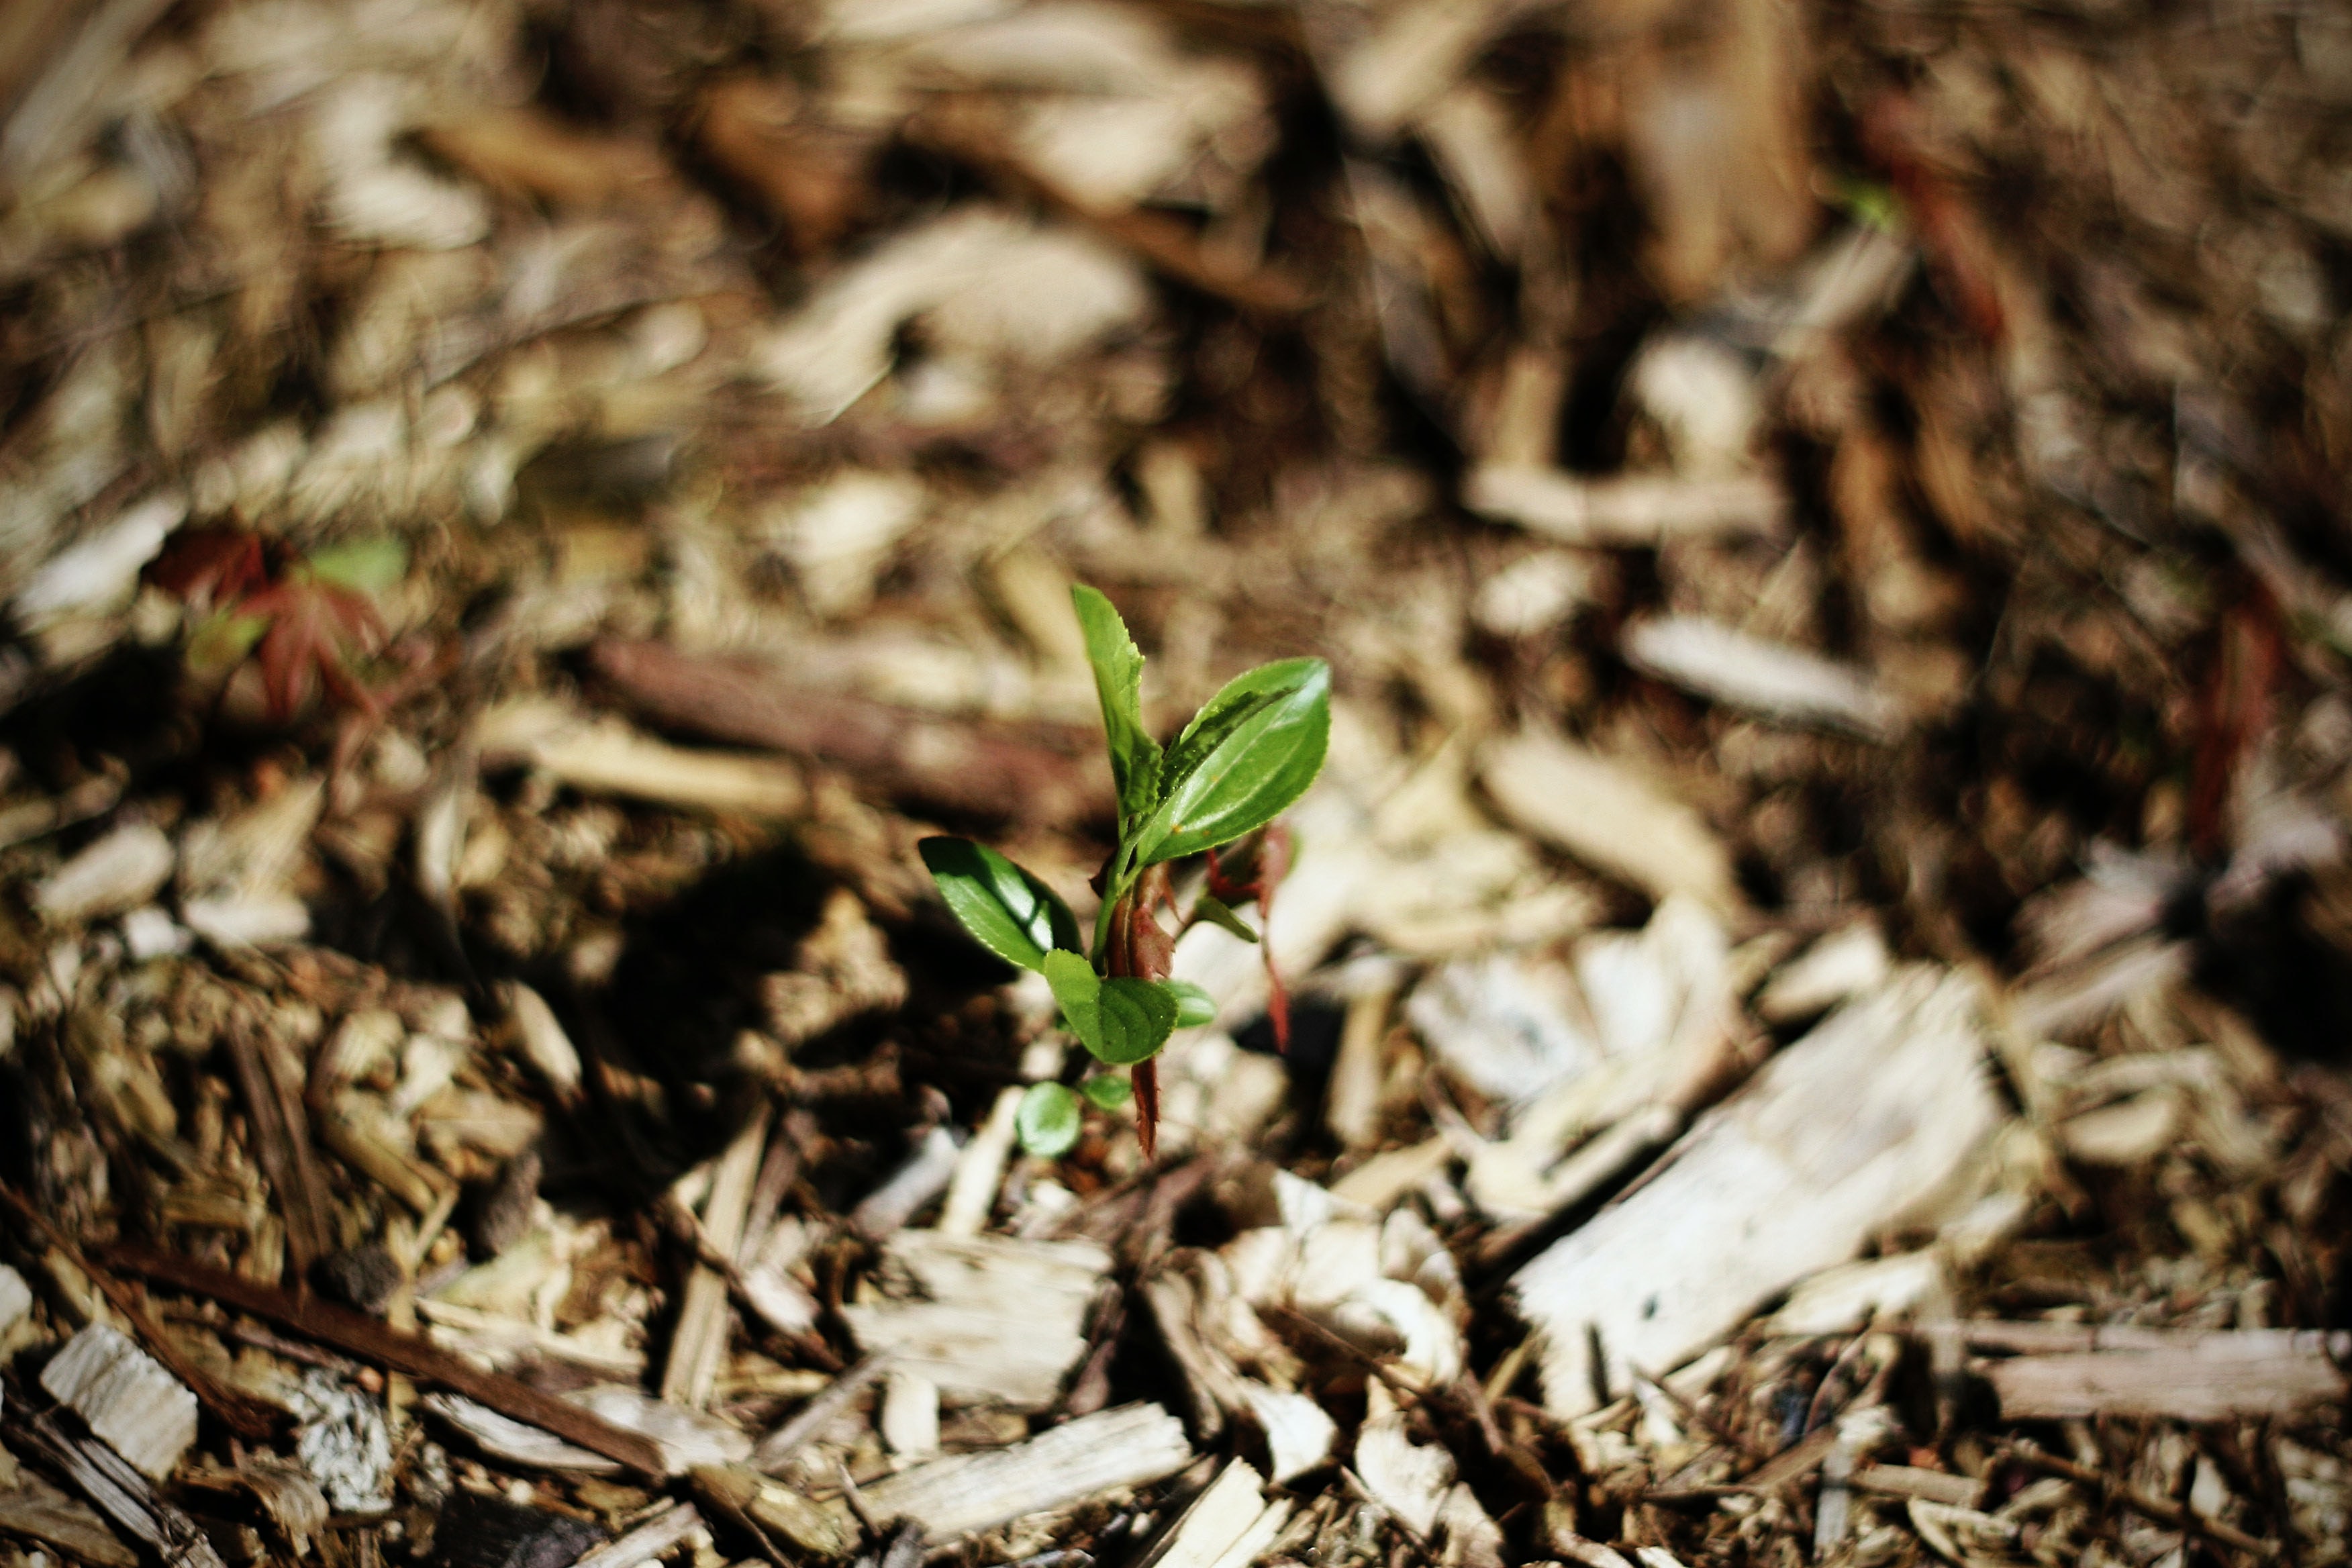 A green shoot growing out of a bed of mulch.